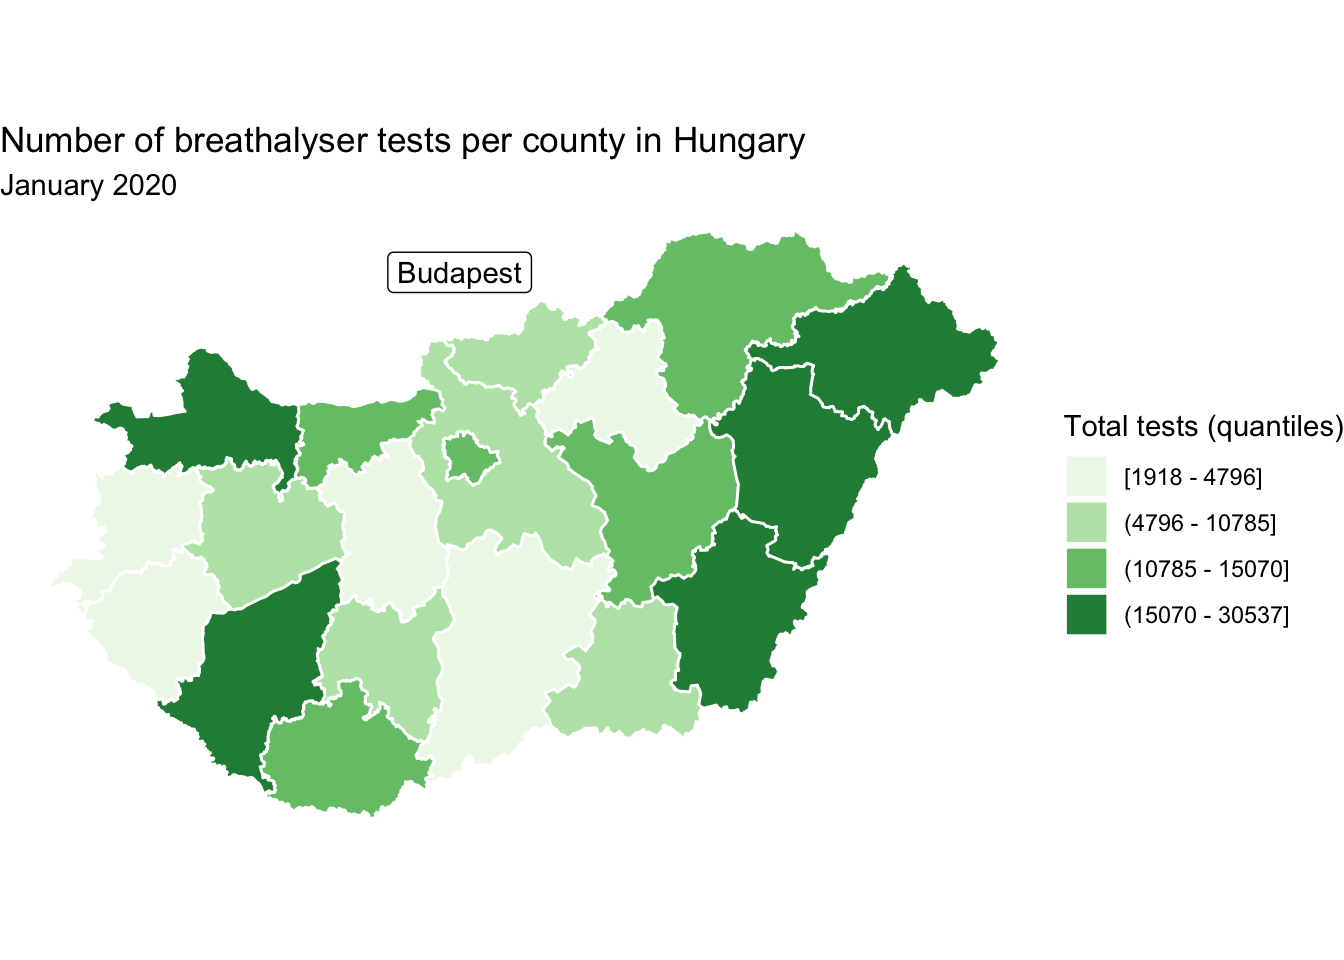 Still the same green shaded map of the counties of Hungary, now a label for 'Budapest' floats north of the country, not covering any of it.